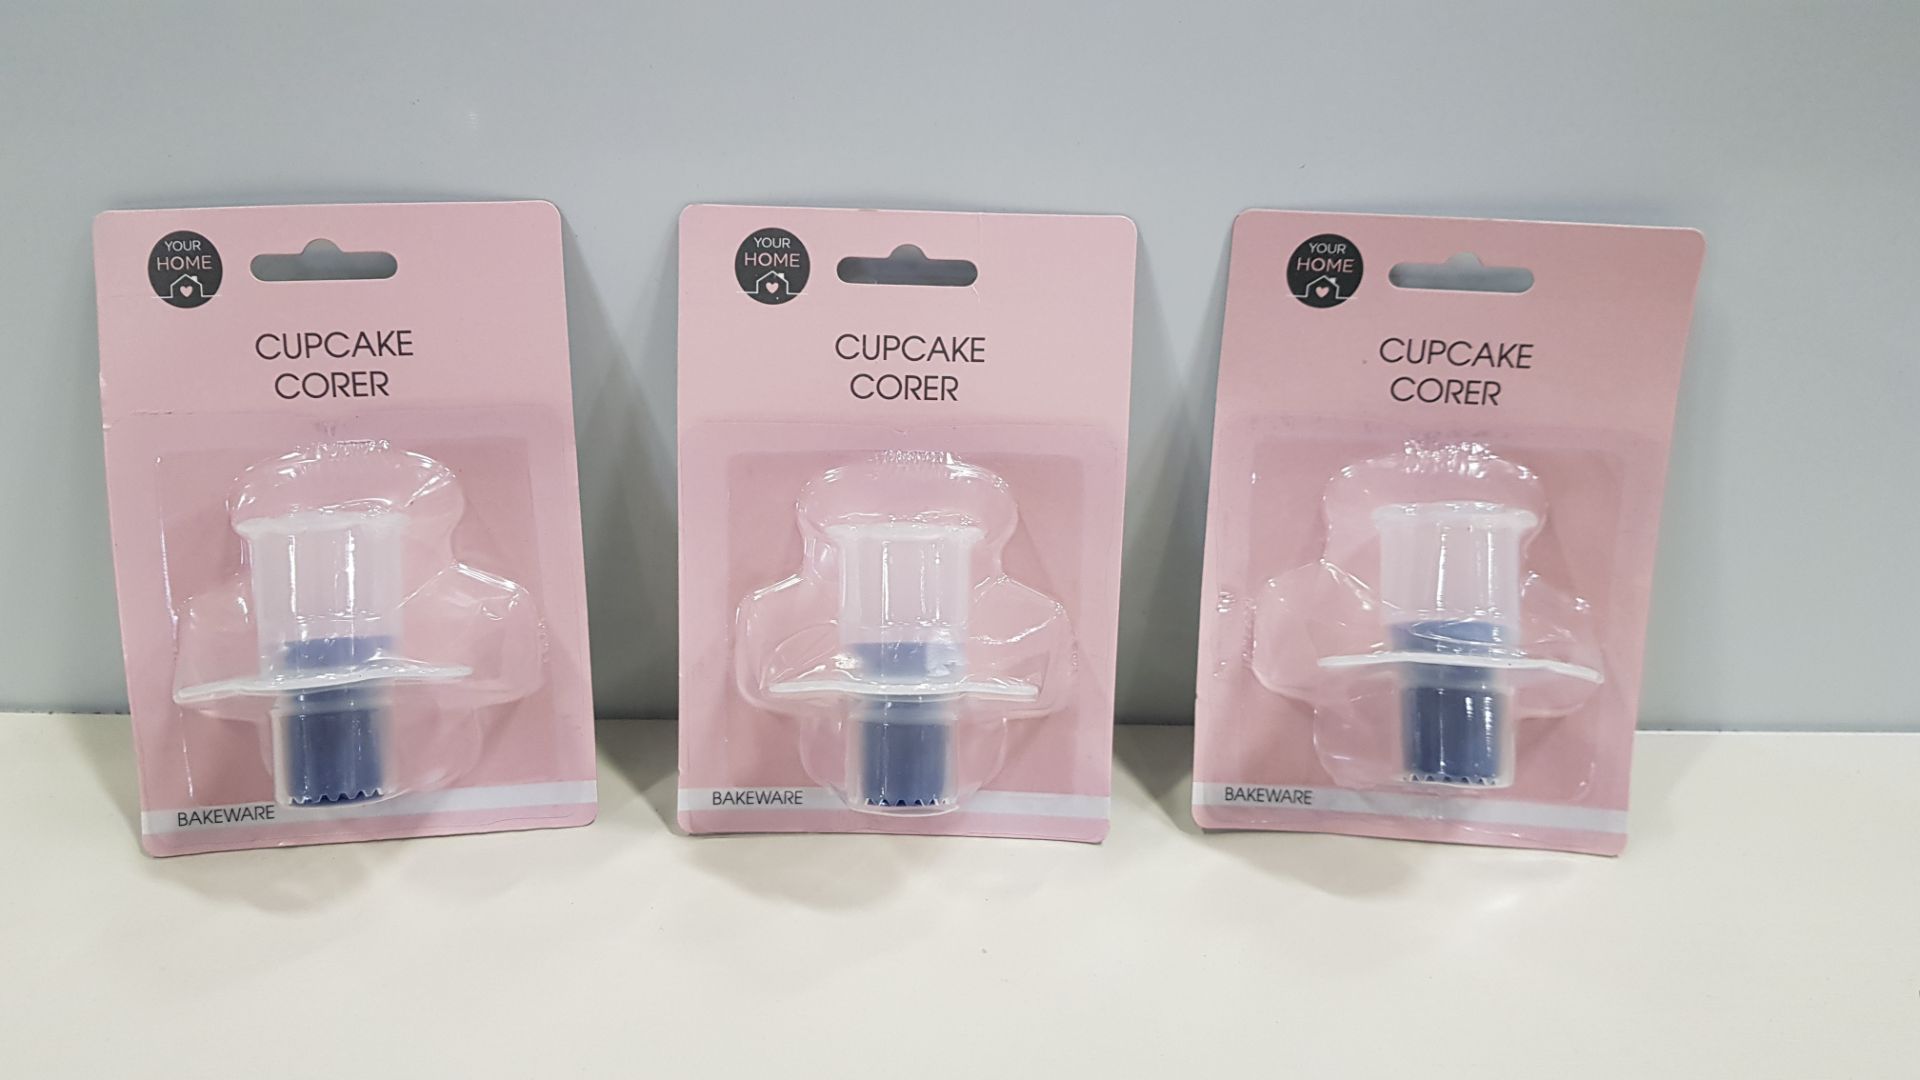 360 X BRAND NEW BAKEWARES CUPCAKE CORERS IN 12 BOXES